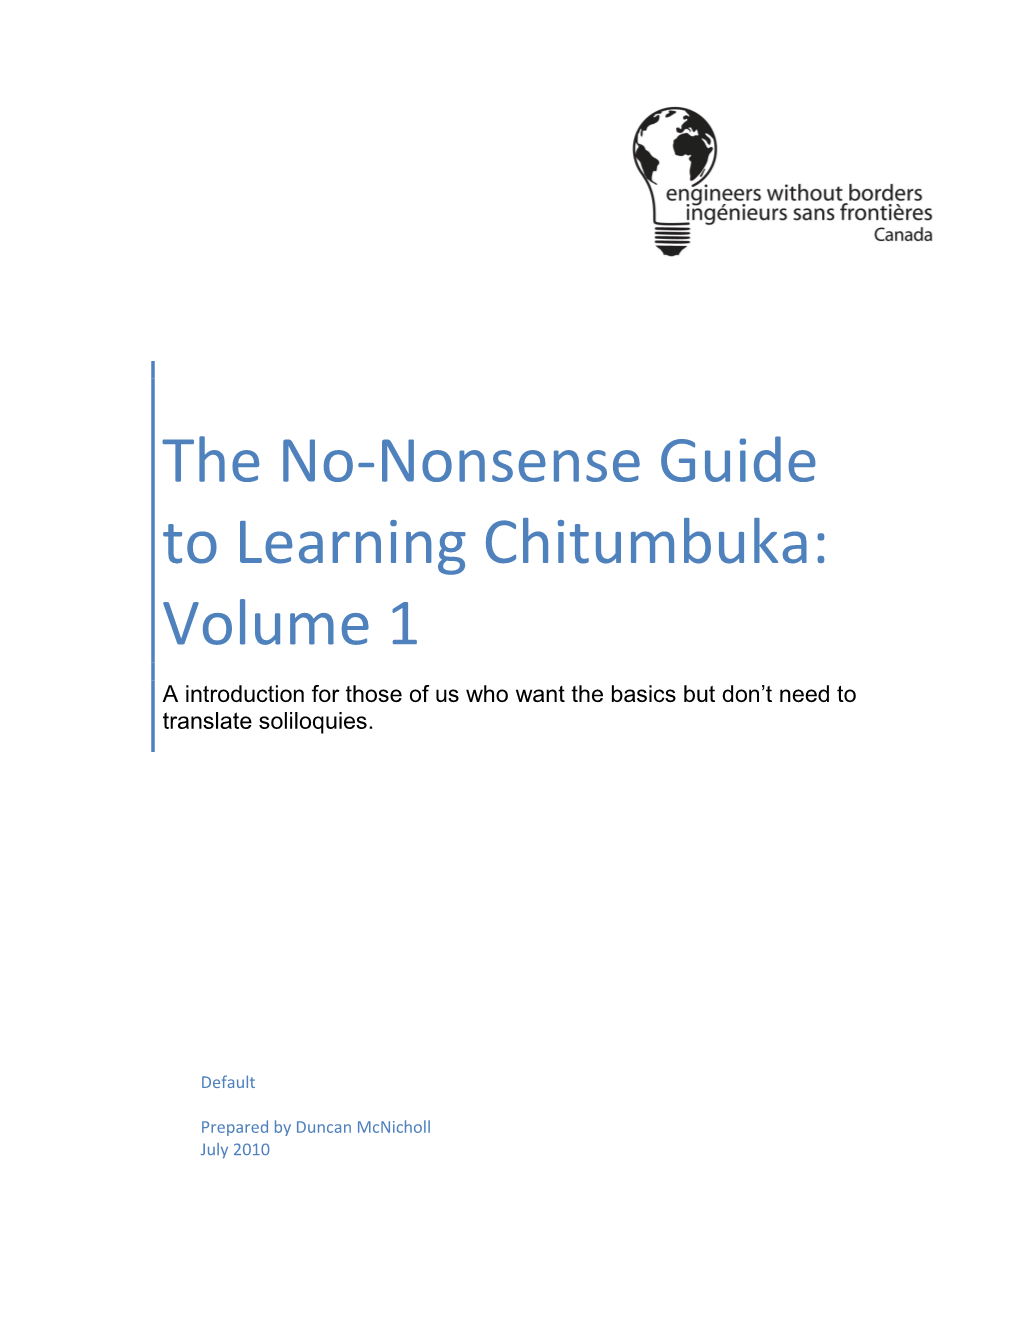 The No-Nonsense Guide to Learning Chitumbuka: Volume 1 a Introduction for Those of Us Who Want the Basics but Don’T Need to Translate Soliloquies